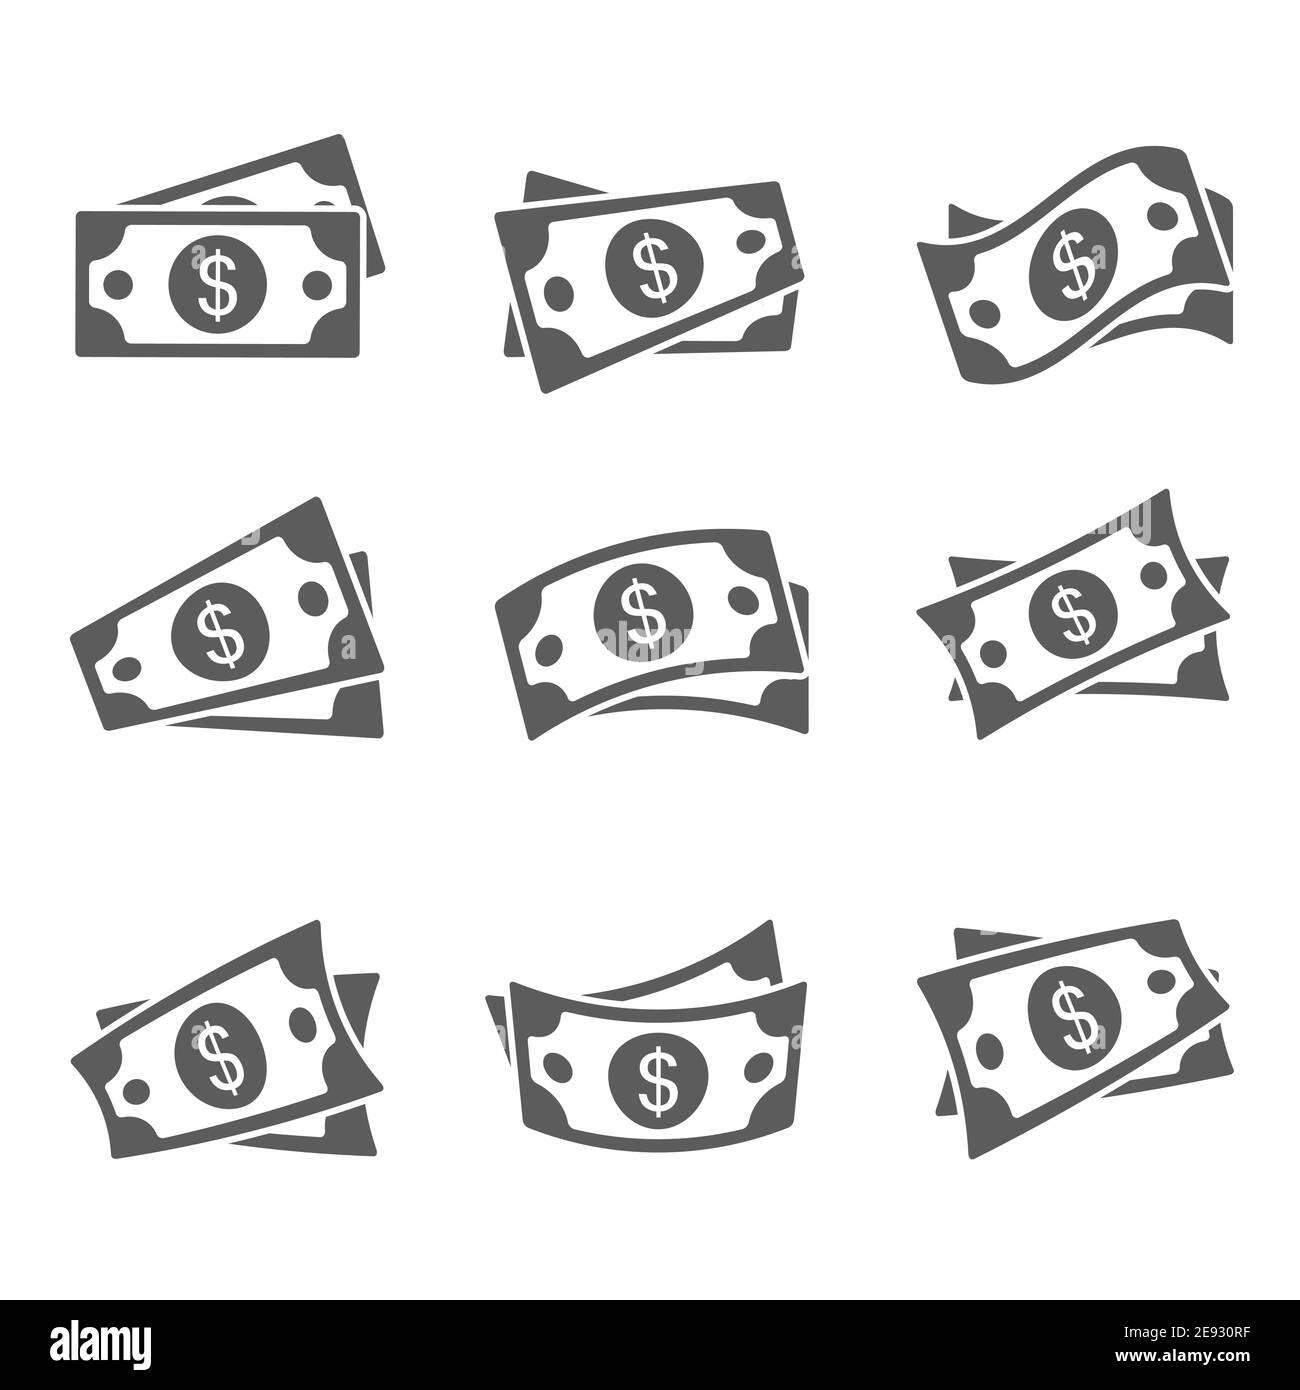 Dollar cash icon set. Currency symbol. Black money silhouette collection in flat style. Vector illustration isolated on white background. Stock Vector